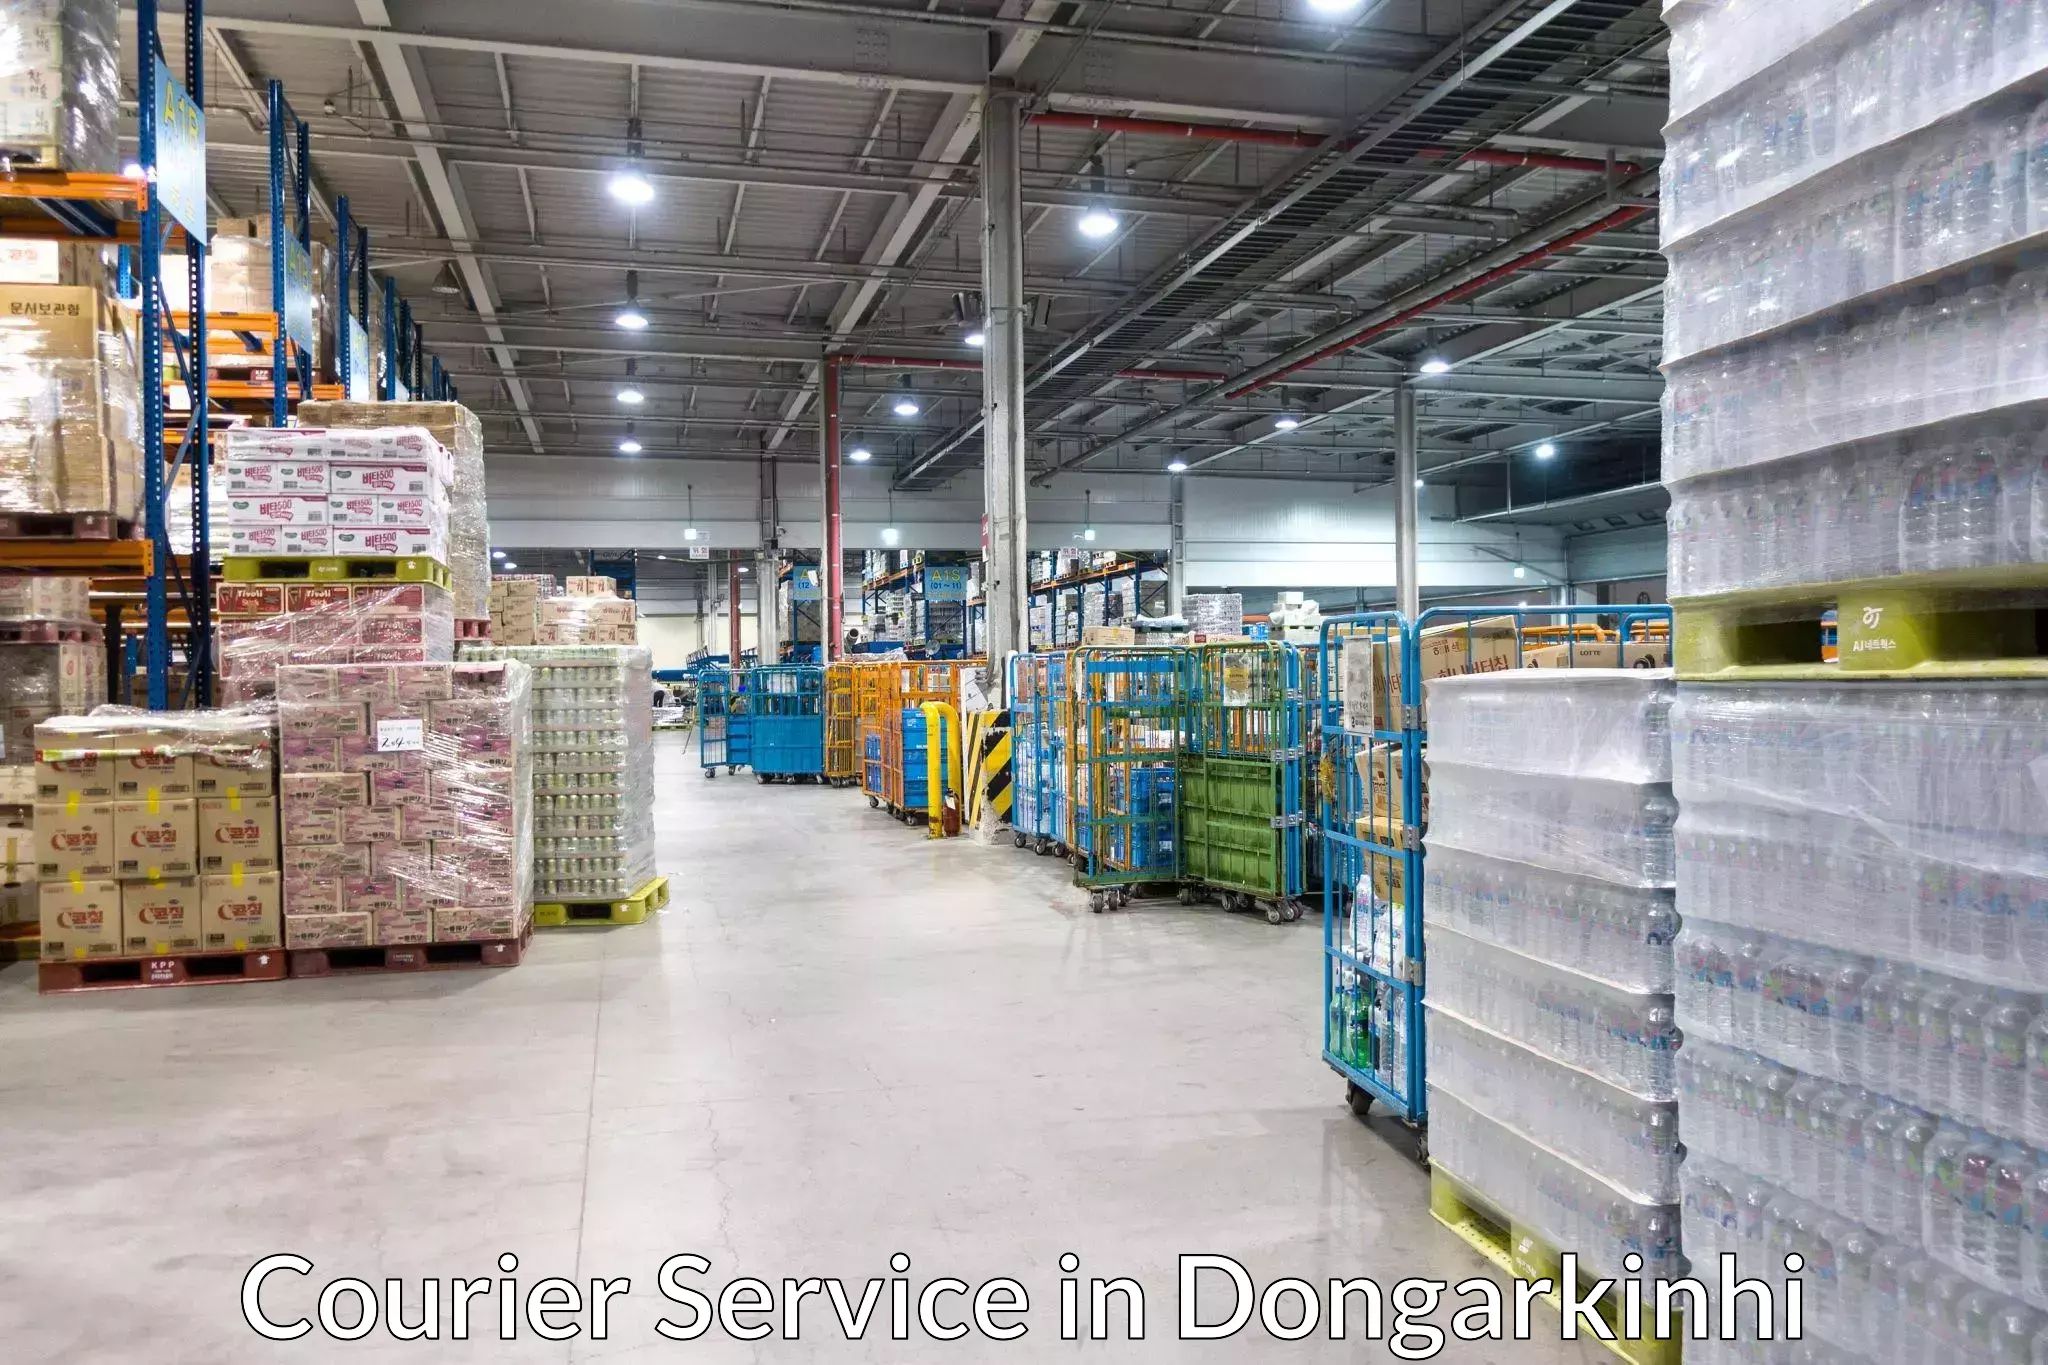 Sustainable courier practices in Dongarkinhi